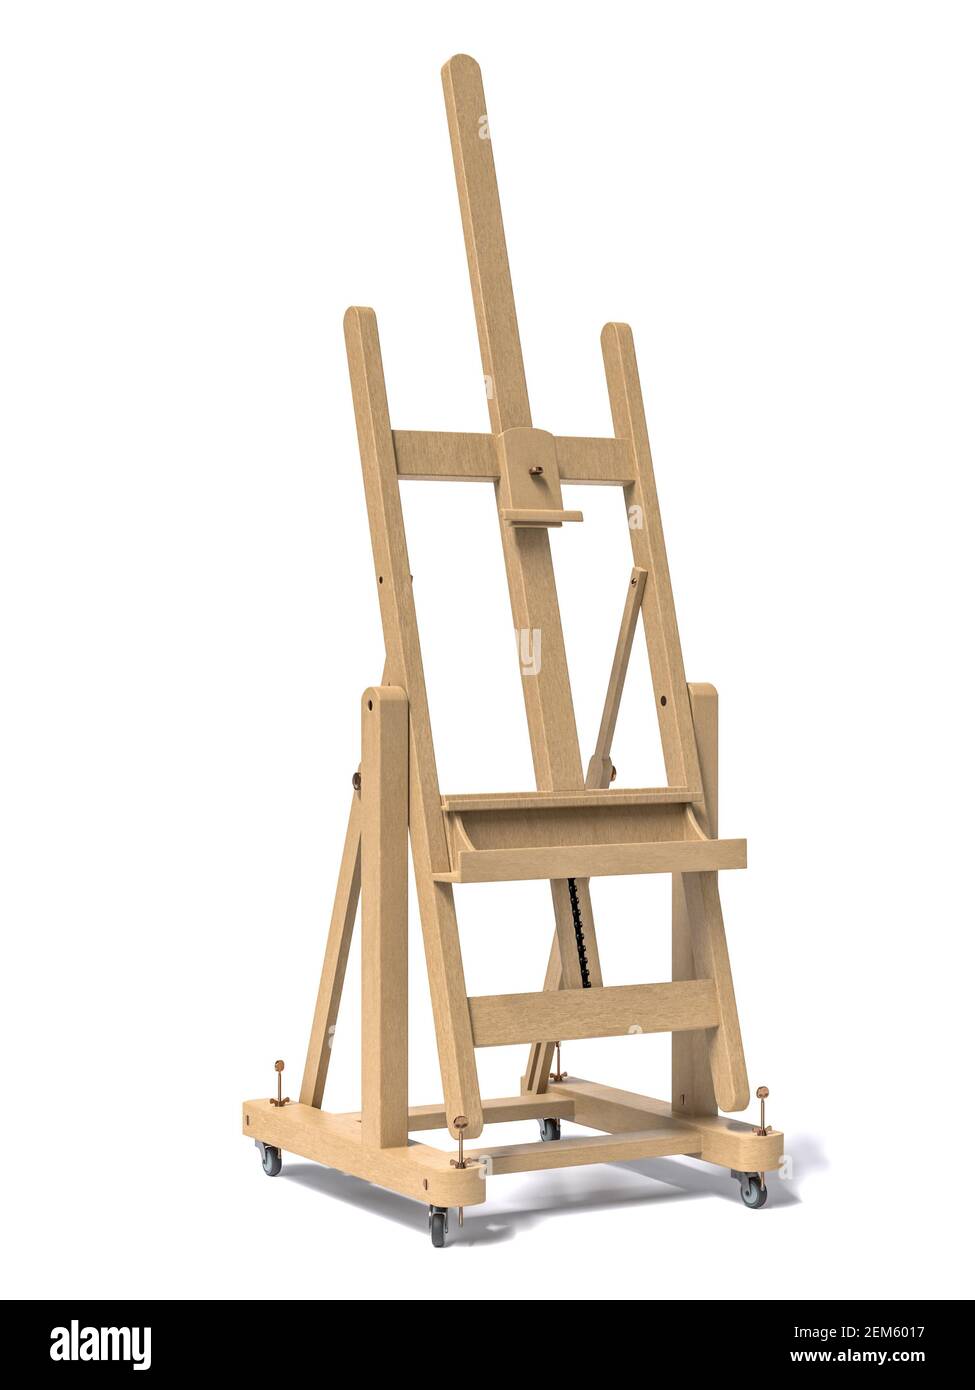 Large wooden easel shot on white background Stock Photo